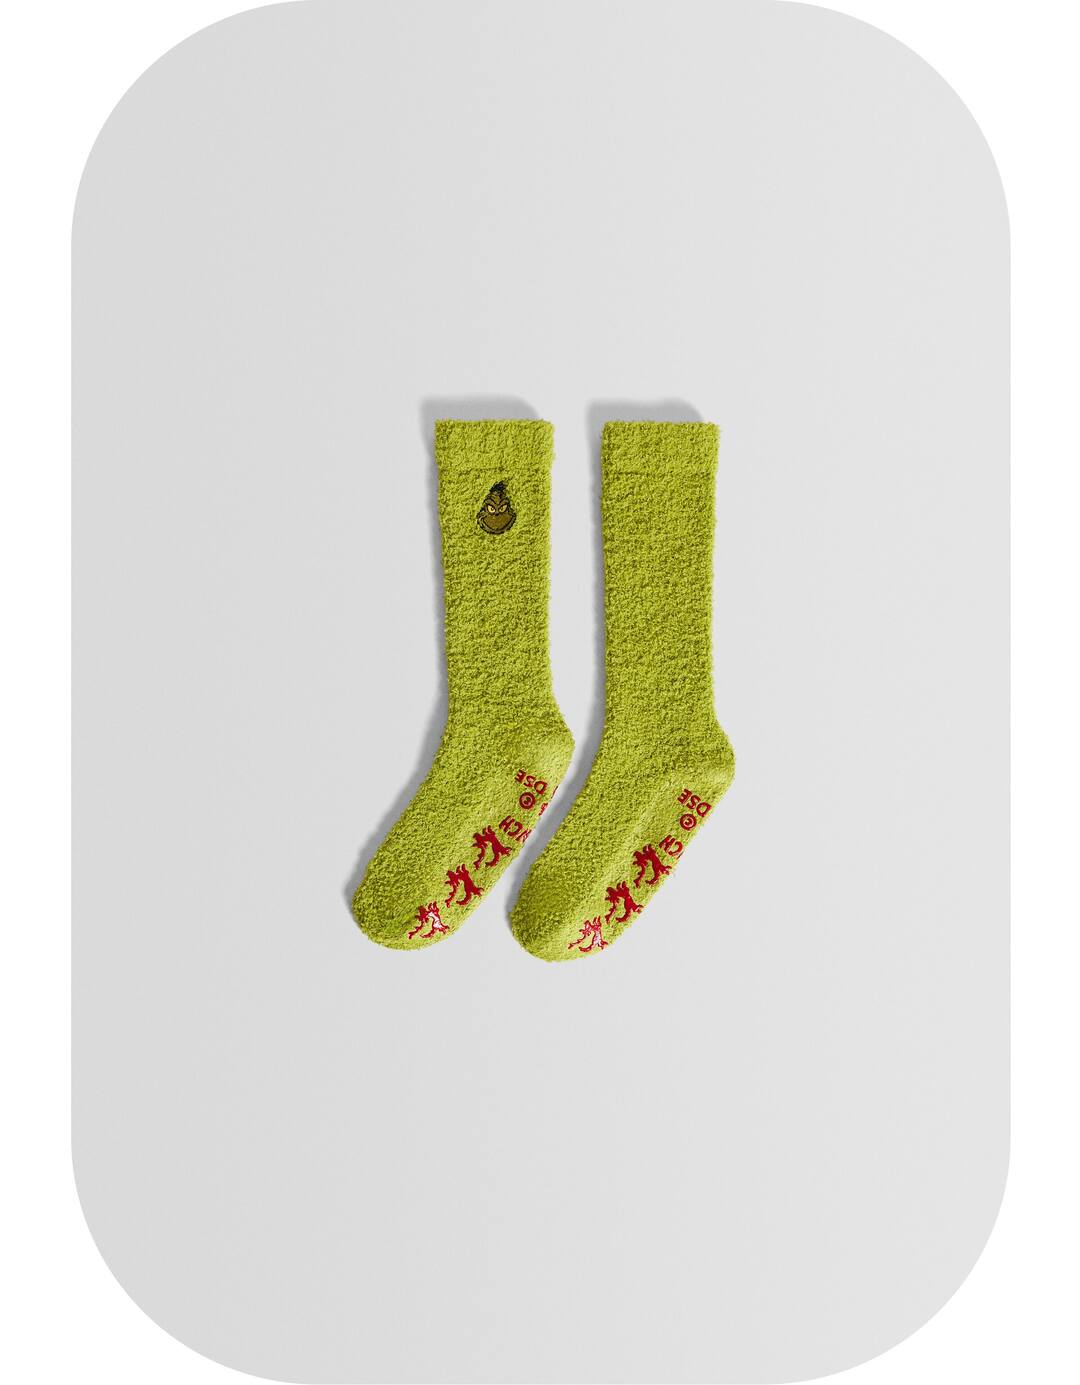 The Grinch non-slip socks with embroidery